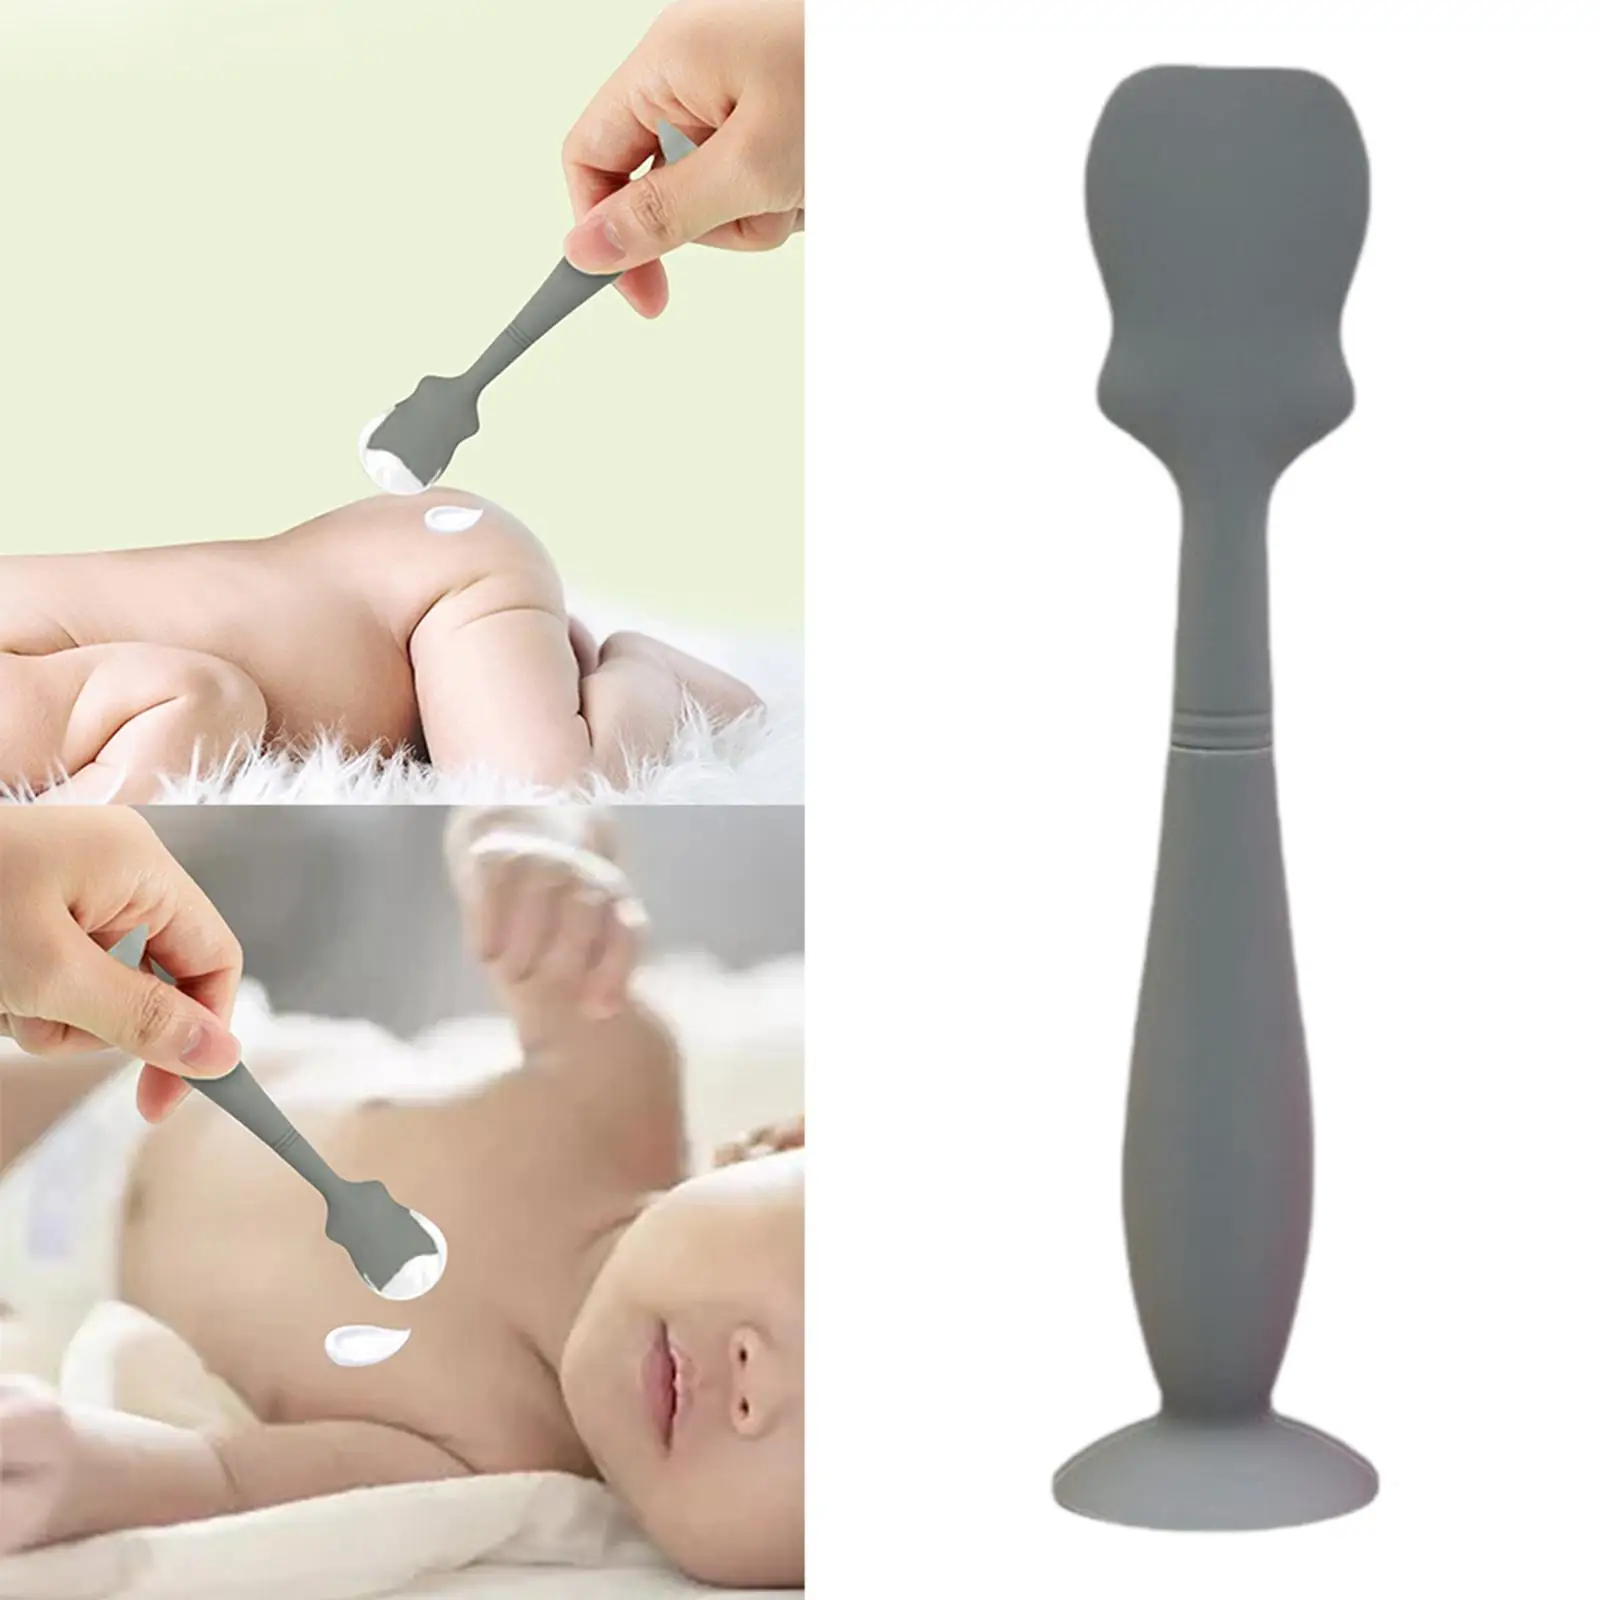 Cream Spatula Applicator Soft with Suction Cup Base Baby Butt Paste Spatula for Kids Boys Newborn